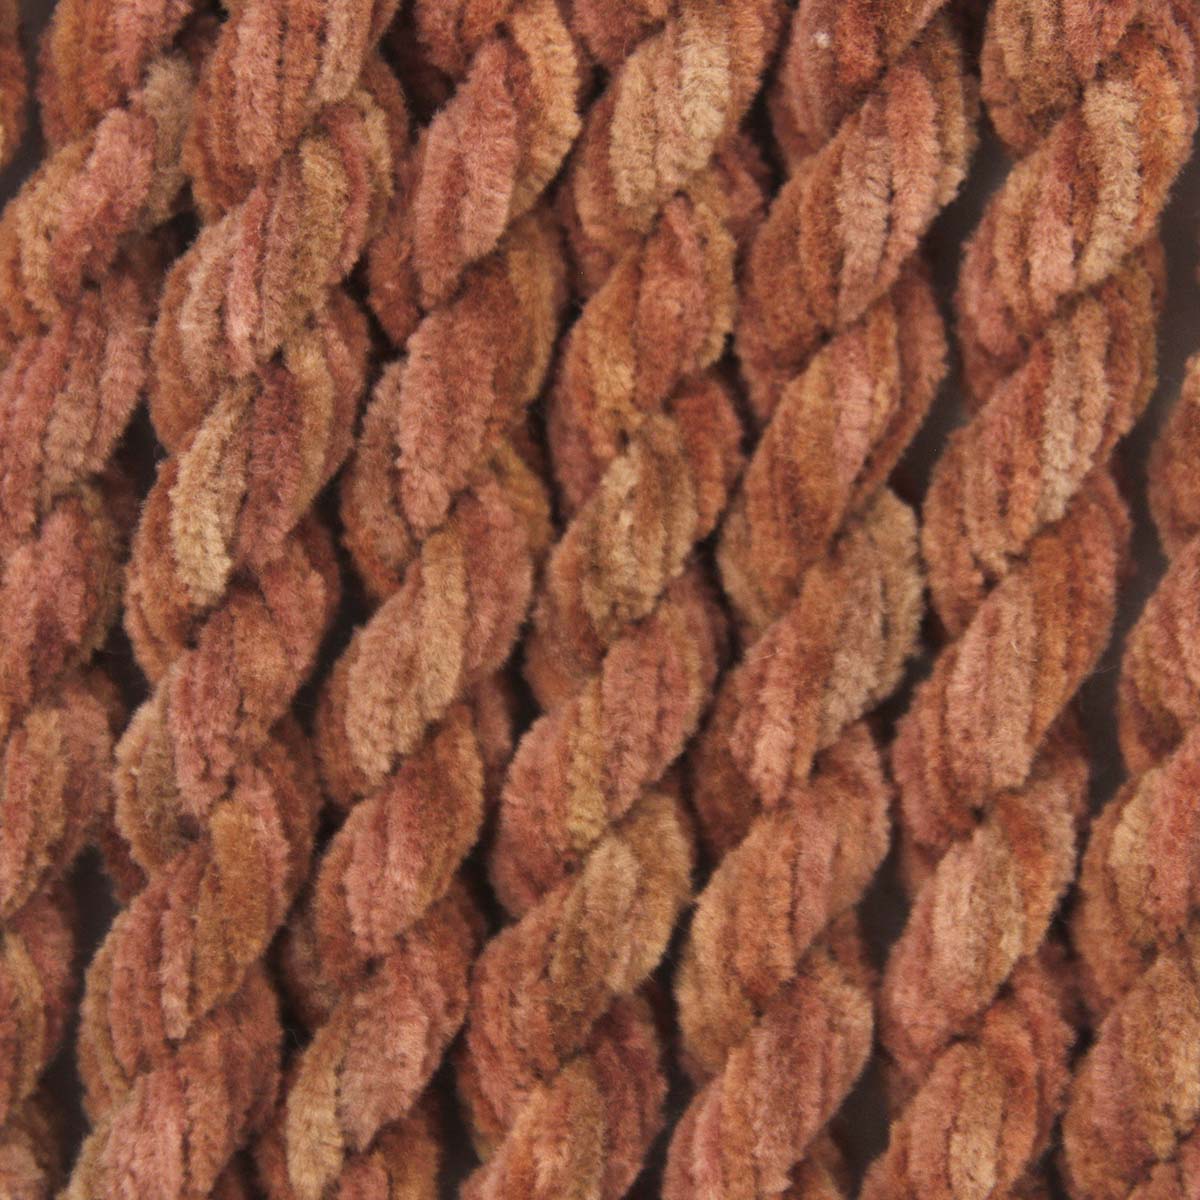 www.colourstreams.com.au Colour Streams Hand Dyed Chenille Threads Slow Stitch Embroidery Textile Arts Fibre DL 29 Russet Browns